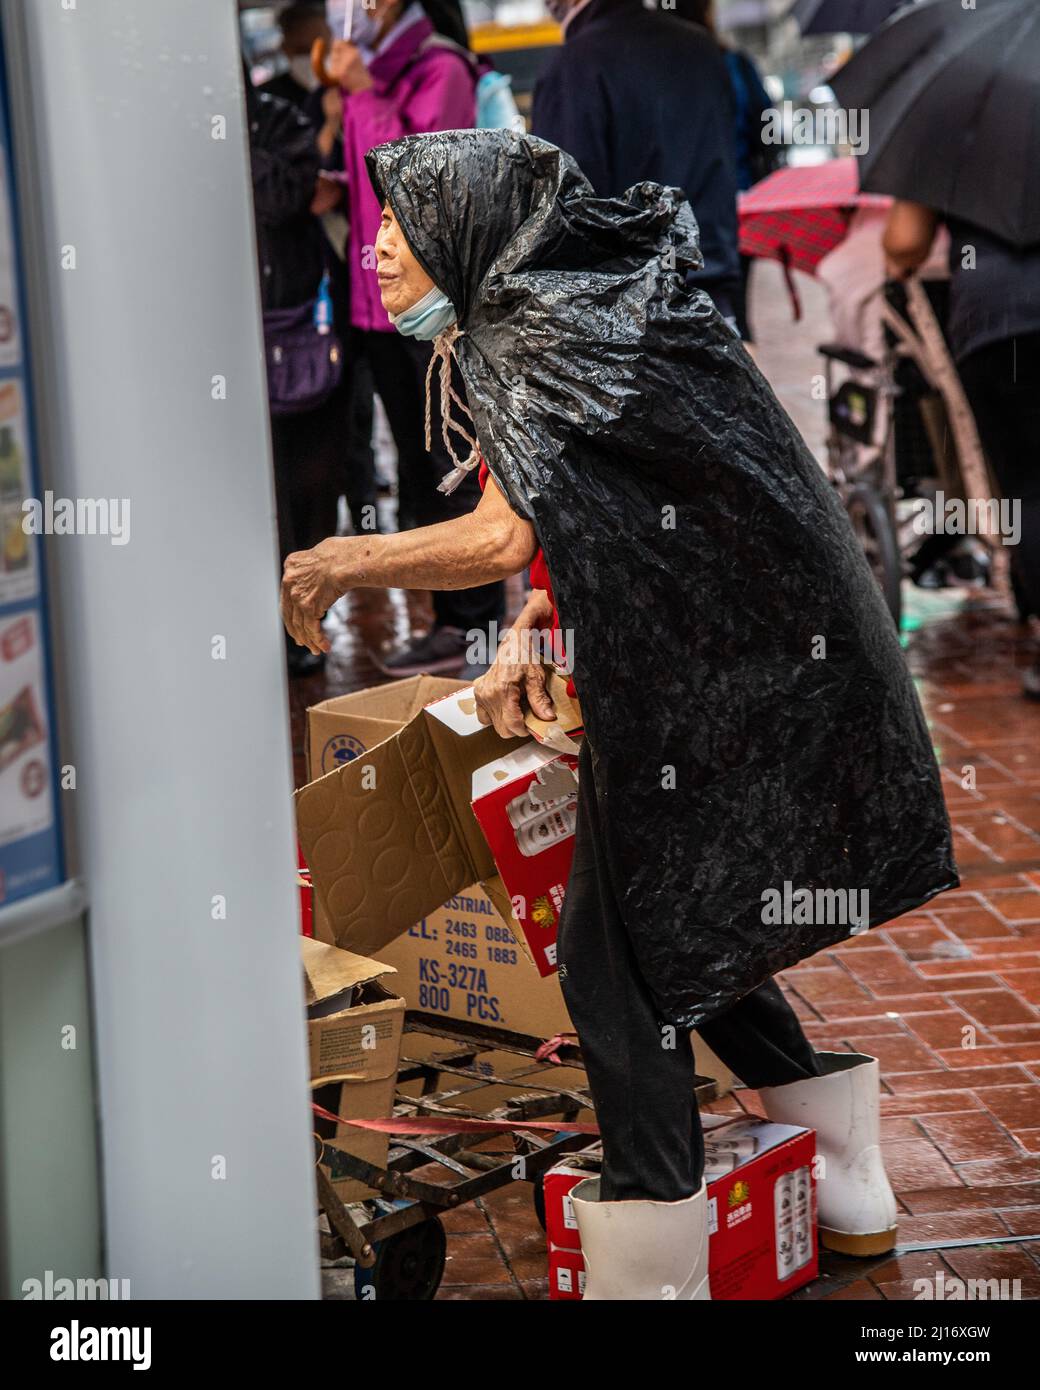 An elderly woman covered with a plastic to protect her from the rain is seen collecting cardboard as a northern monsoon brings cooler weather and rain to Hong Kong. A rainy, spring day in Hong Kong. Stock Photo